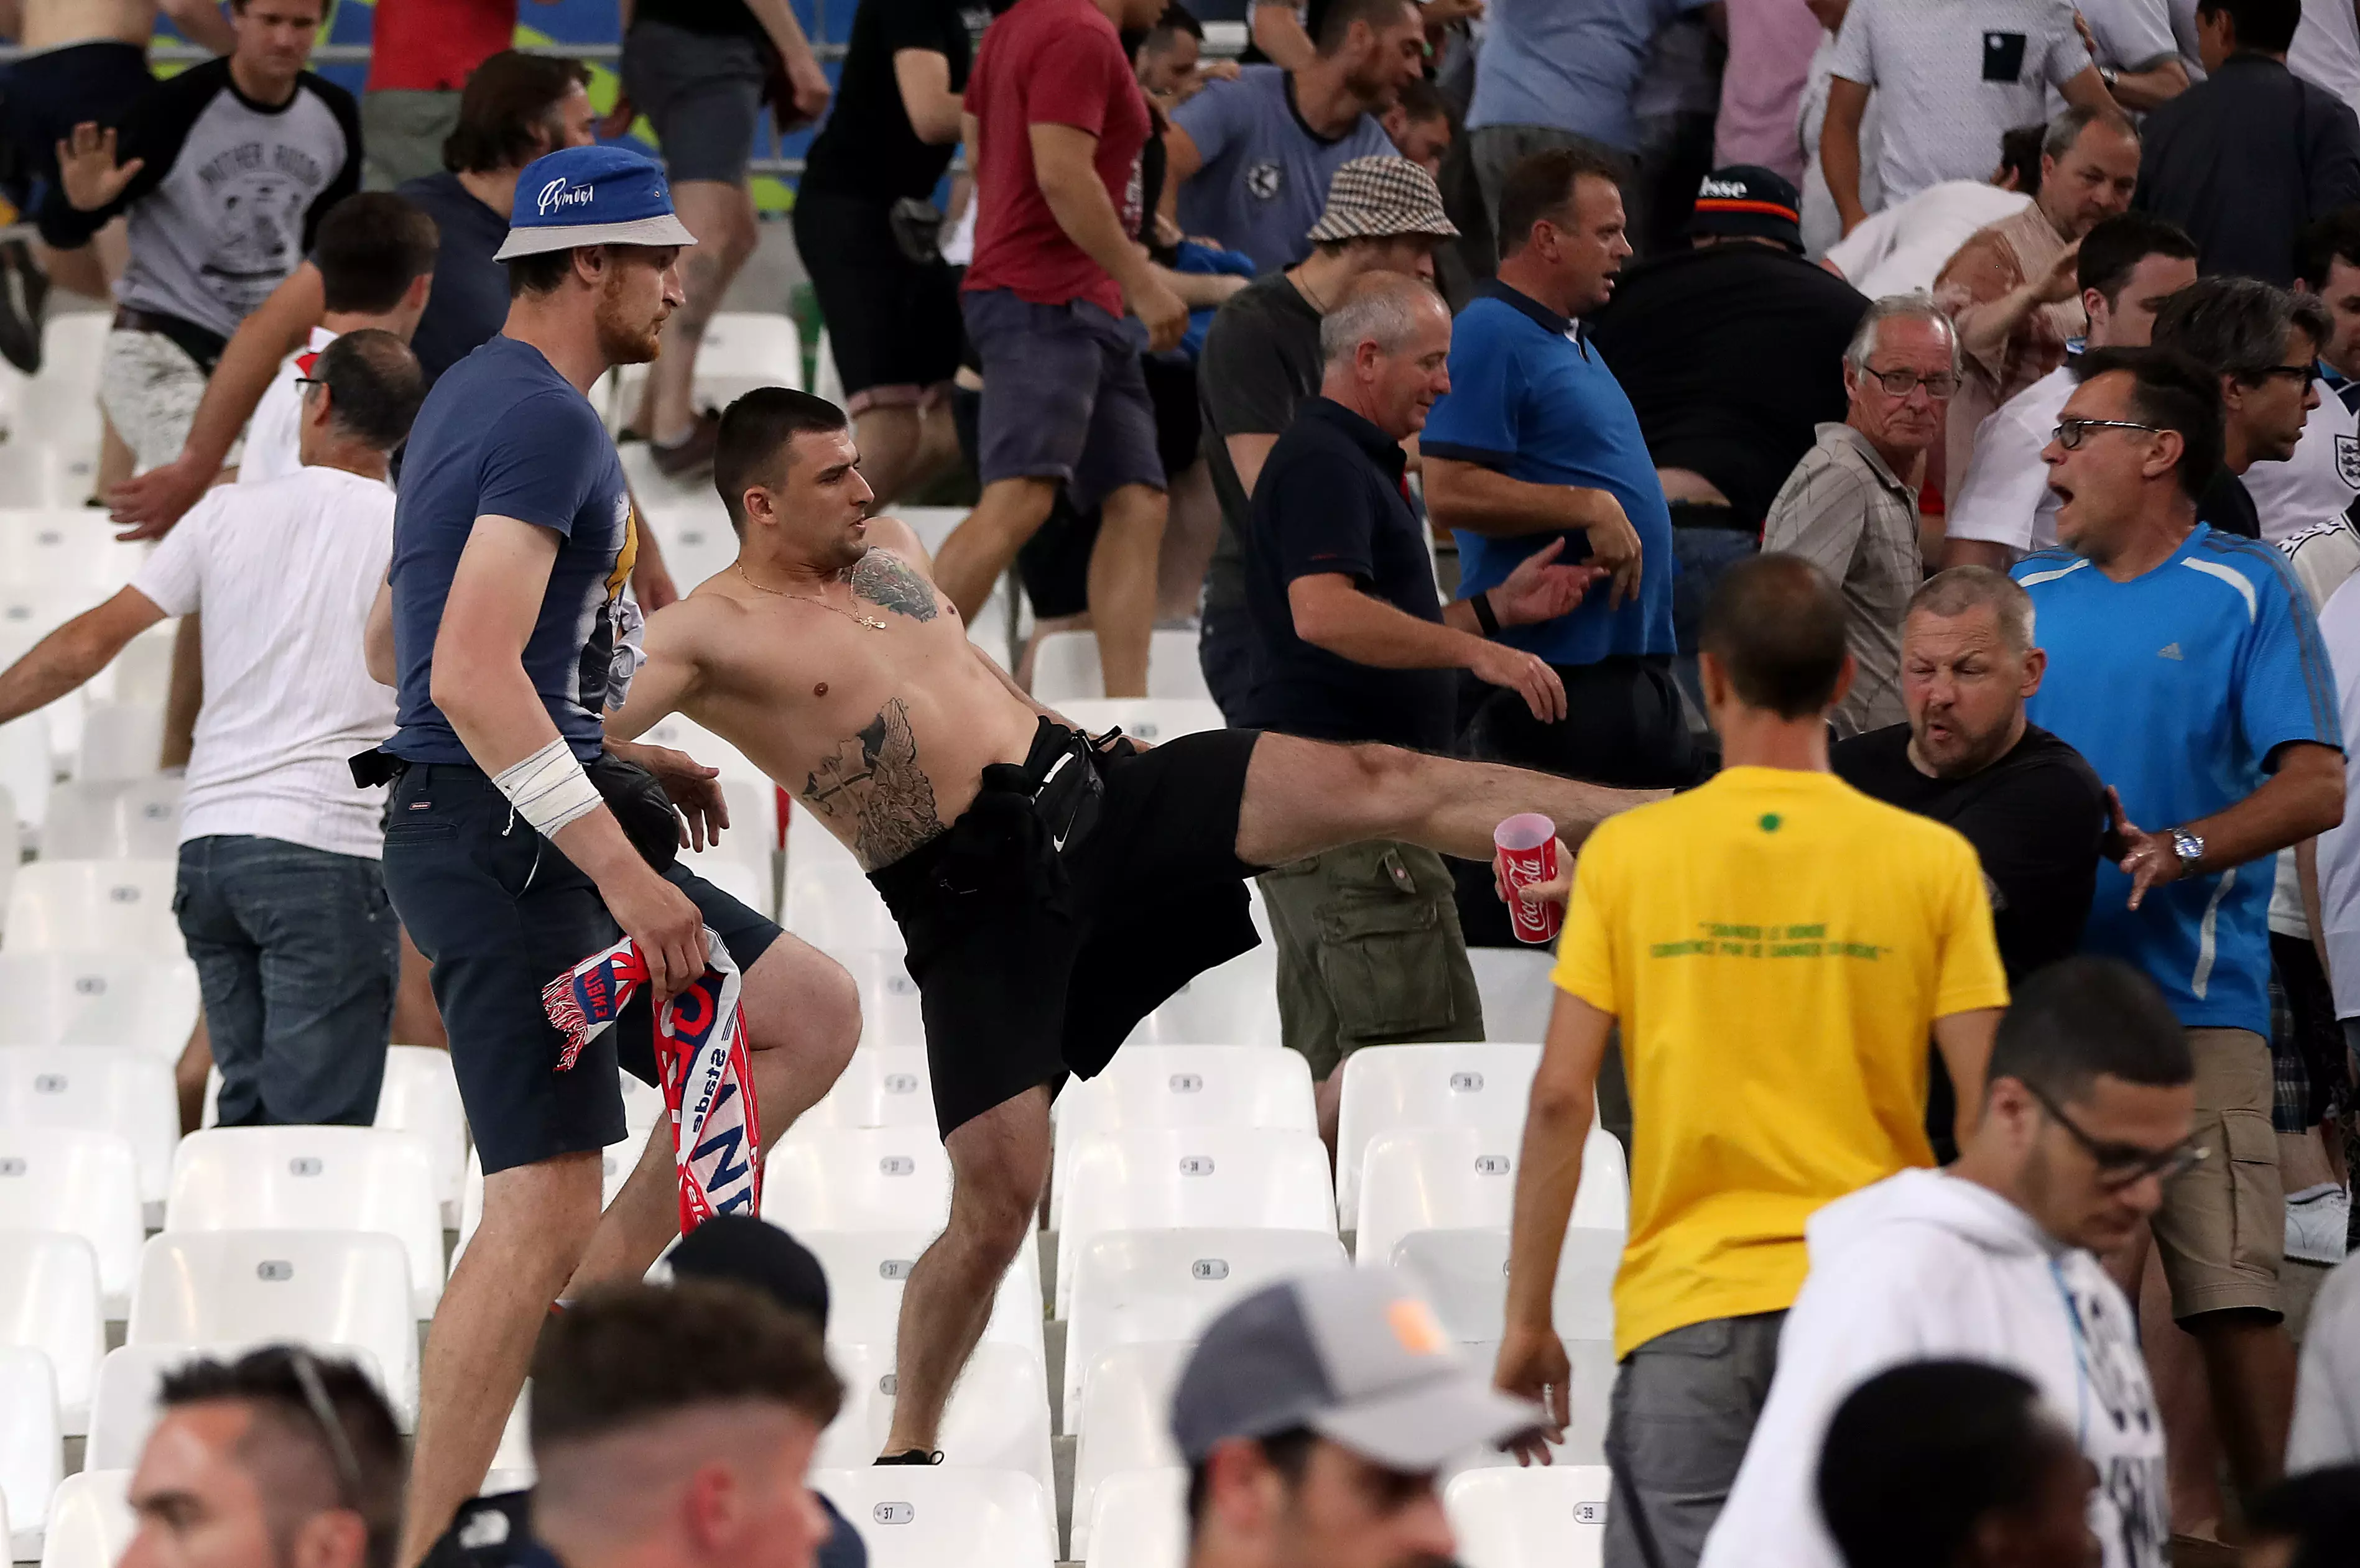 WATCH: Shocking Scenes Of Russia Charging The England Supporters